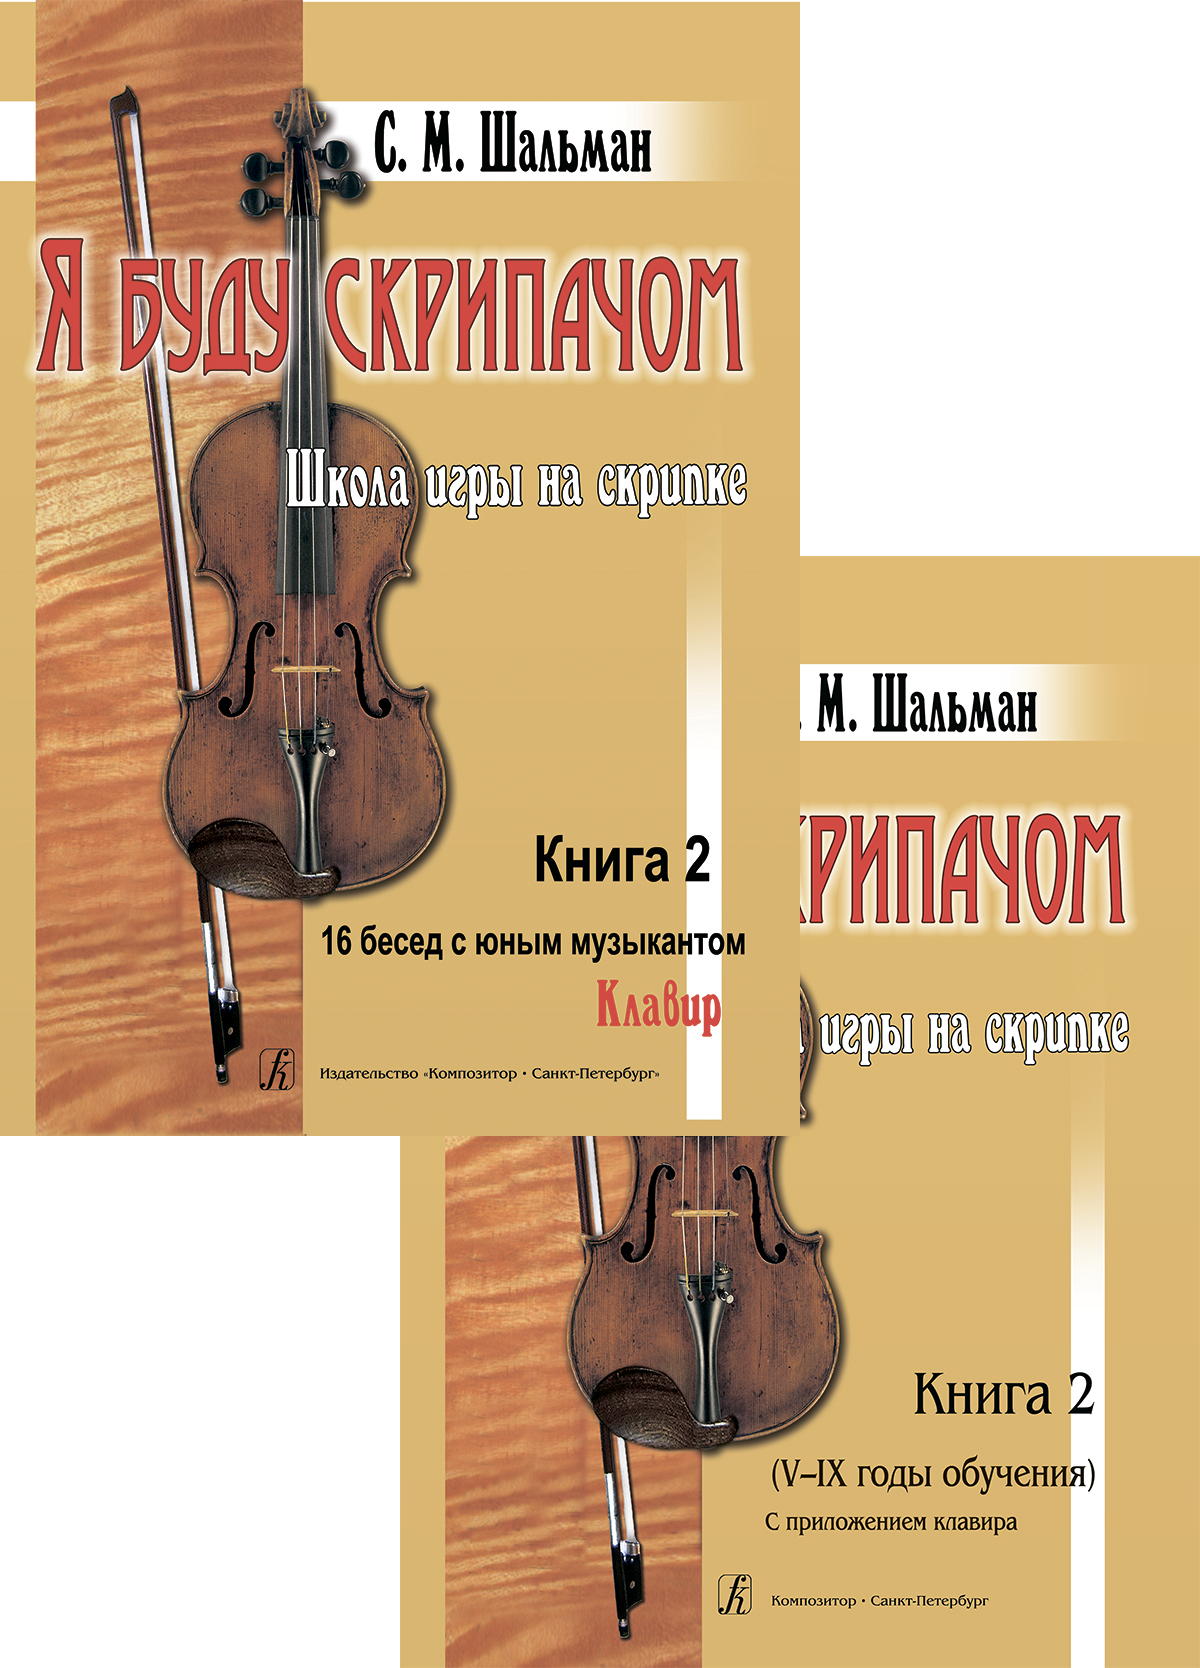 Shalman S. I Will Be a Violinist. Book 2. 5–9 forms